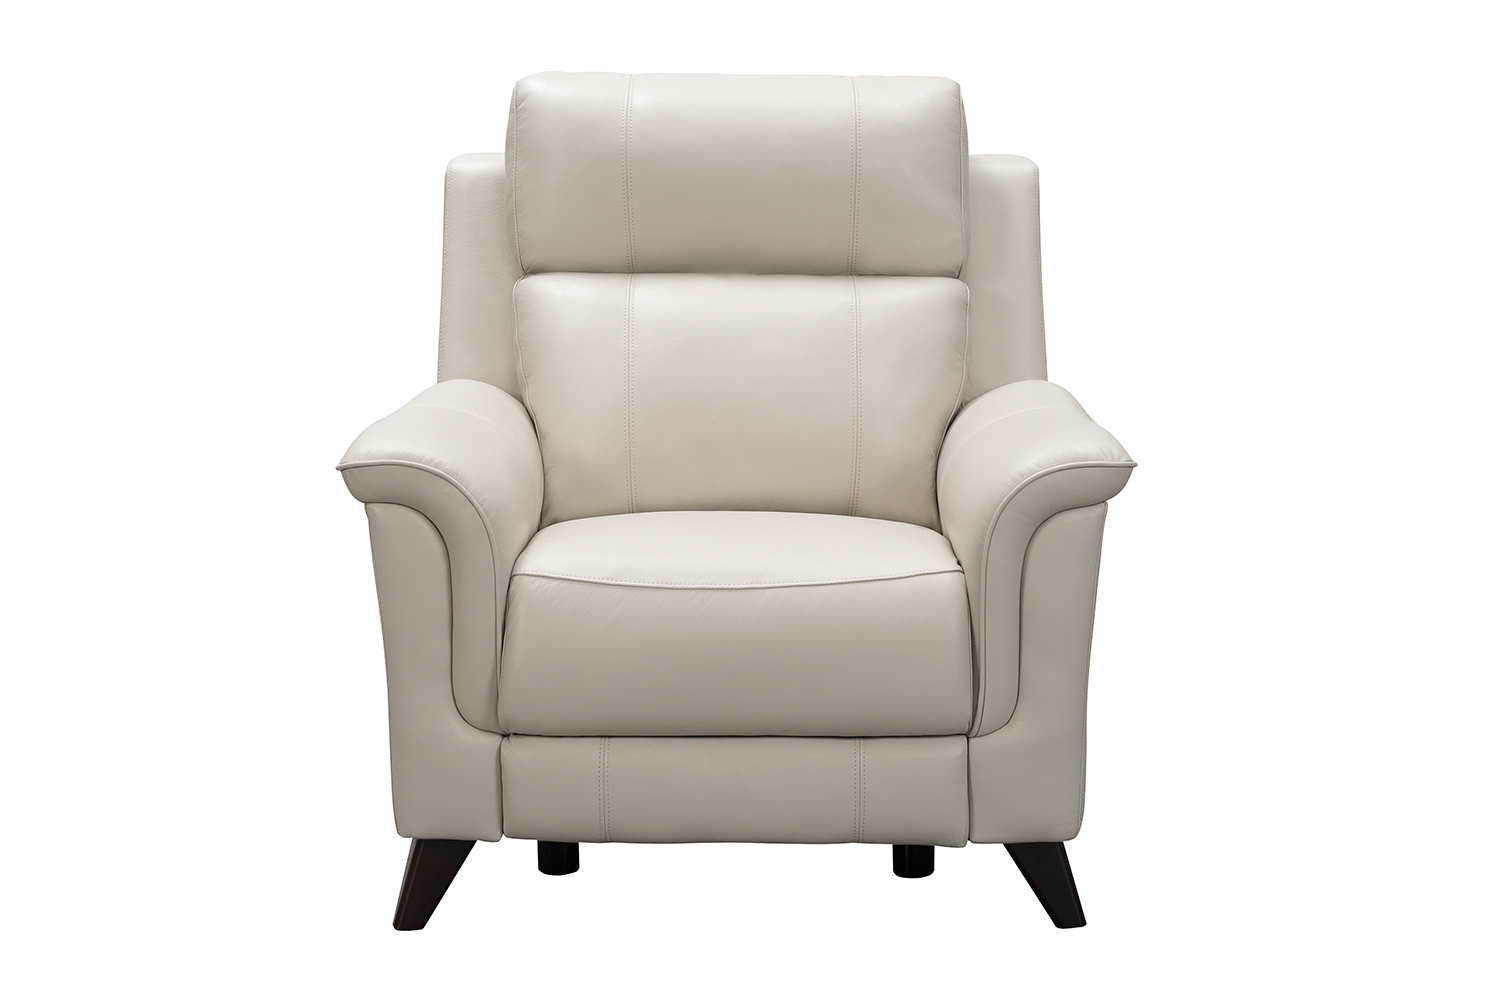 Barcalounger Kester Power Recliner Chair with Power Head Rest - Laurel Cream/Leather match